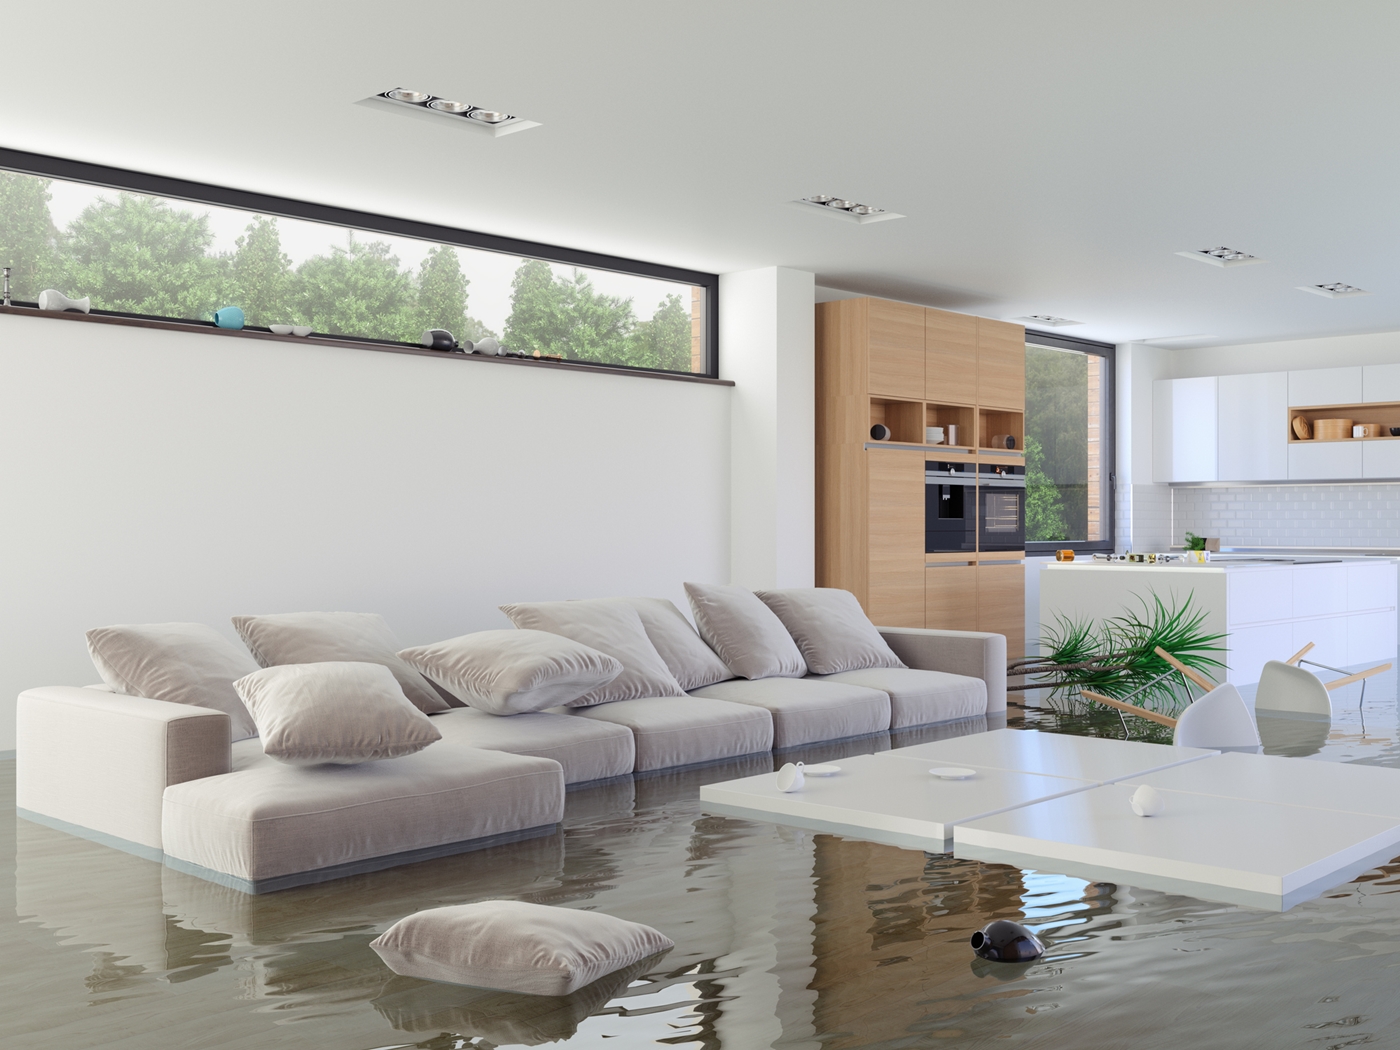 Flooding Causes Short-term Dip in House Prices, Longer Selling Times